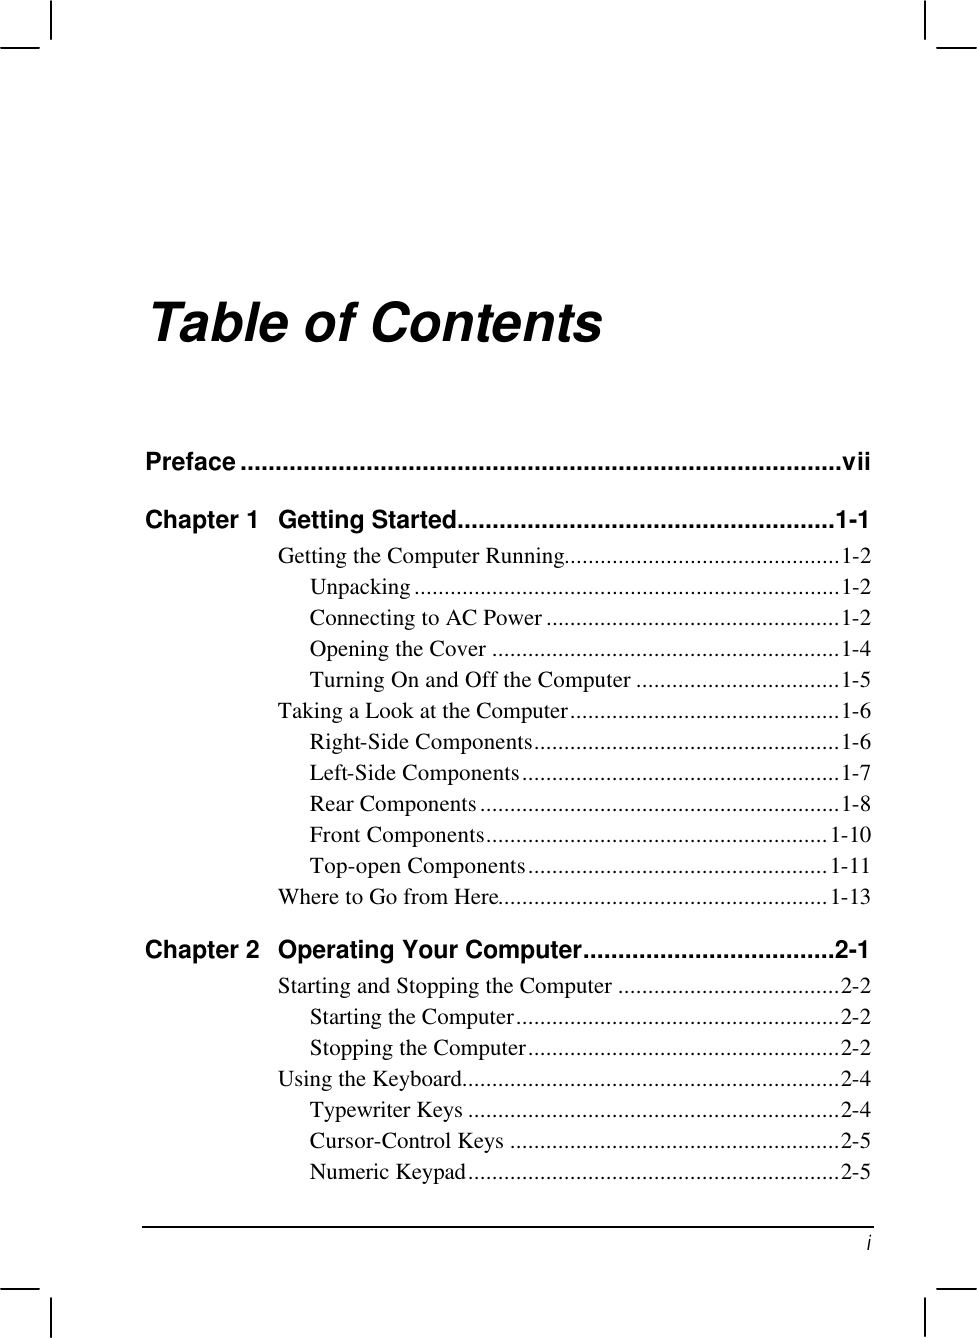   i Table of Contents Preface......................................................................................vii Chapter 1 Getting Started......................................................1-1 Getting the Computer Running..............................................1-2 Unpacking.......................................................................1-2 Connecting to AC Power .................................................1-2 Opening the Cover ..........................................................1-4 Turning On and Off the Computer ..................................1-5 Taking a Look at the Computer.............................................1-6 Right-Side Components...................................................1-6 Left-Side Components.....................................................1-7 Rear Components............................................................1-8 Front Components.........................................................1-10 Top-open Components..................................................1-11 Where to Go from Here.......................................................1-13 Chapter 2 Operating Your Computer....................................2-1 Starting and Stopping the Computer .....................................2-2 Starting the Computer......................................................2-2 Stopping the Computer....................................................2-2 Using the Keyboard...............................................................2-4 Typewriter Keys ..............................................................2-4 Cursor-Control Keys .......................................................2-5 Numeric Keypad..............................................................2-5 